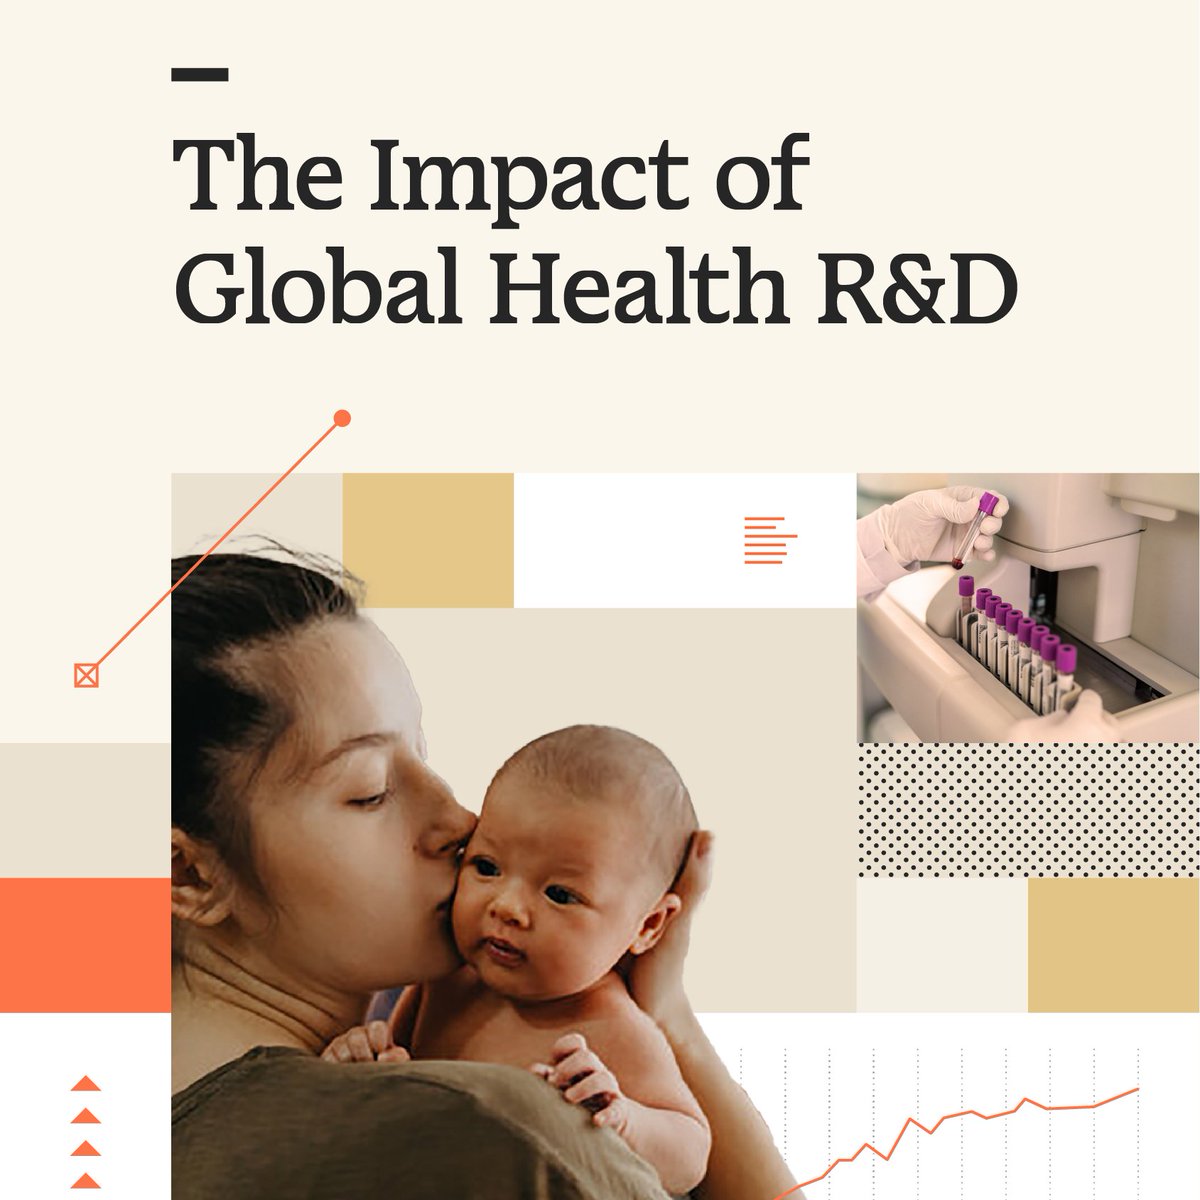 📢 Investing in global health R&D pays off, yielding a staggering health and economic return to societies of $405 for every $1 invested 💰

Read our milestone report on the #impactofRandD and explore all underlying data here: bit.ly/3UT3G8d